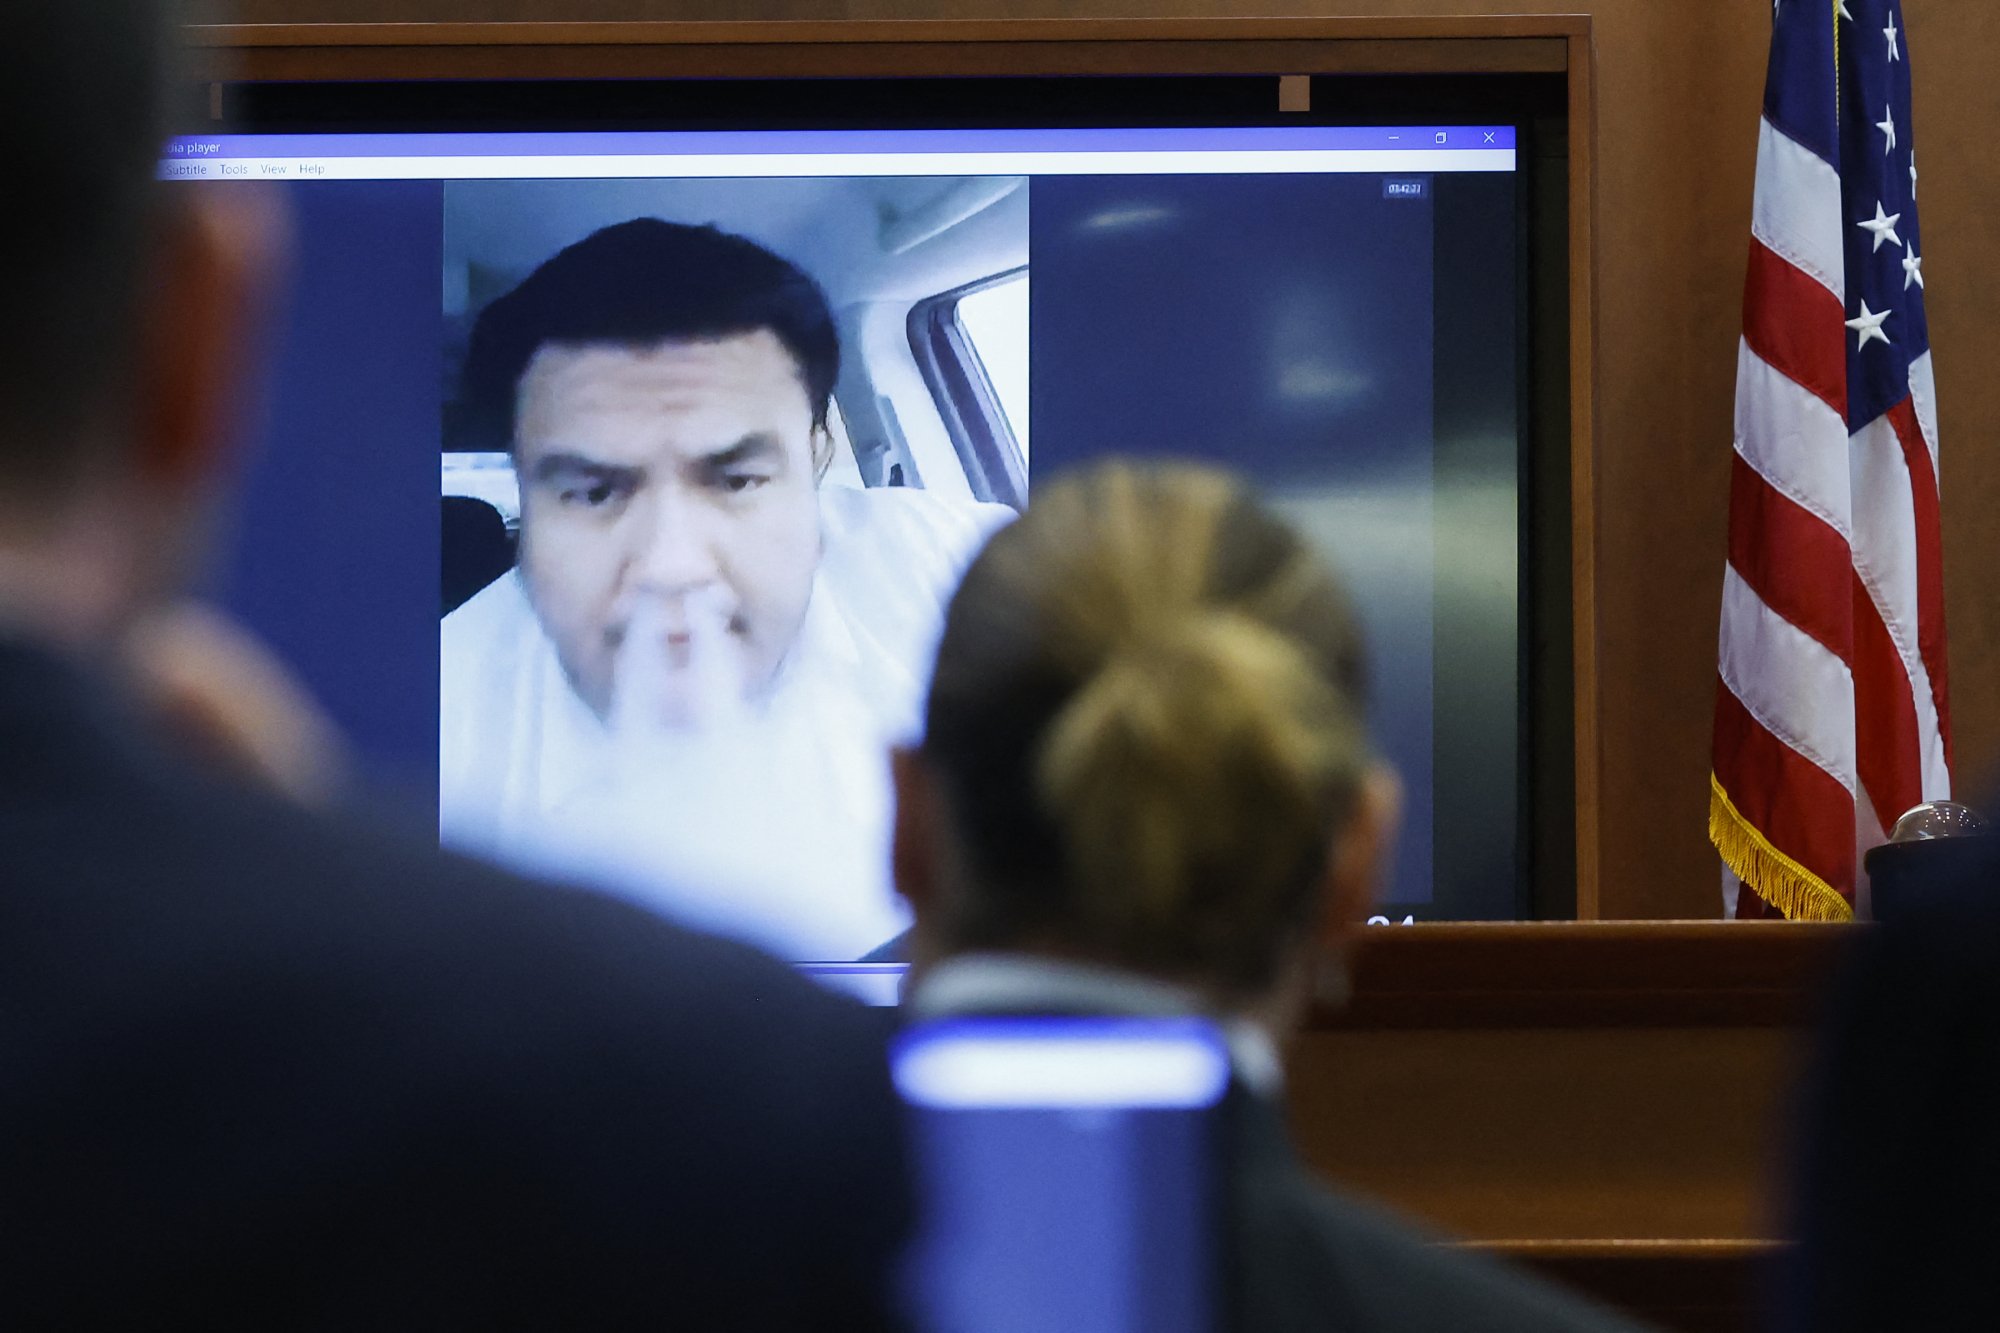 A photo of Romeros' pre-taped deposition as it is played for the court.